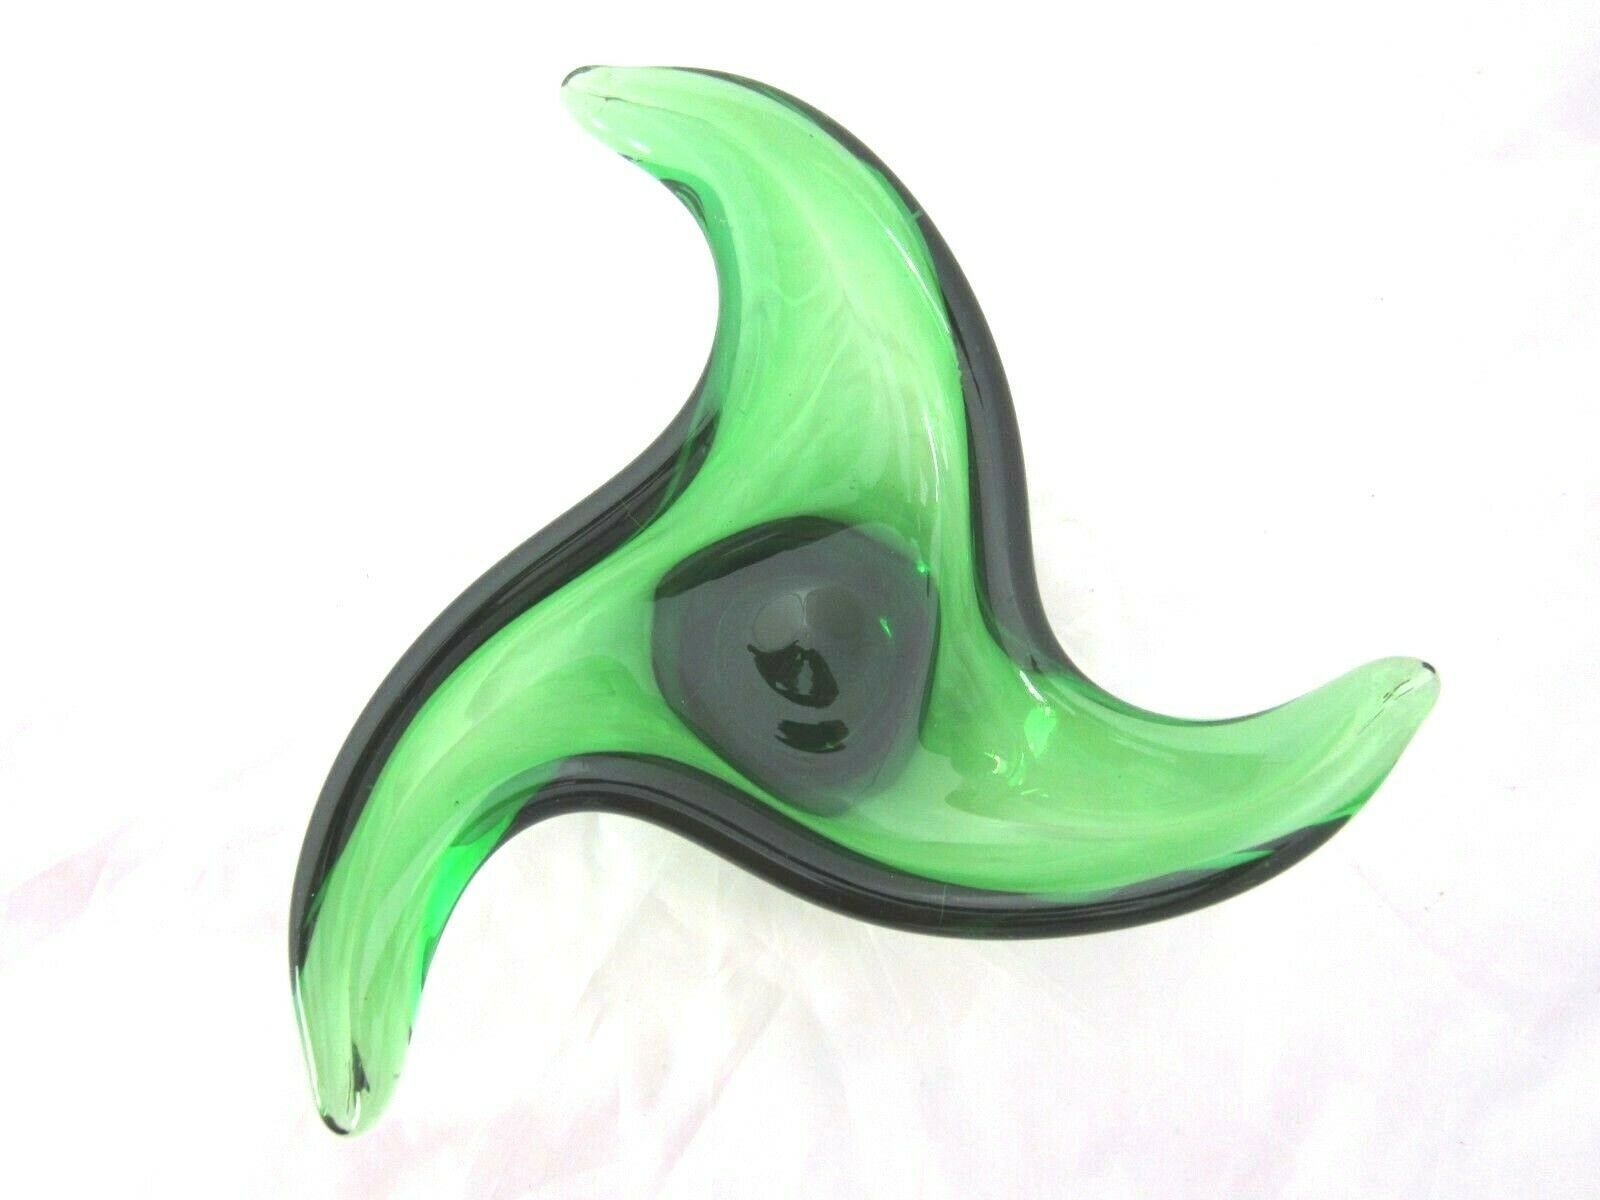 Murano Emerald Green 3 point free form twisted bowl dish sculpture - $58.51